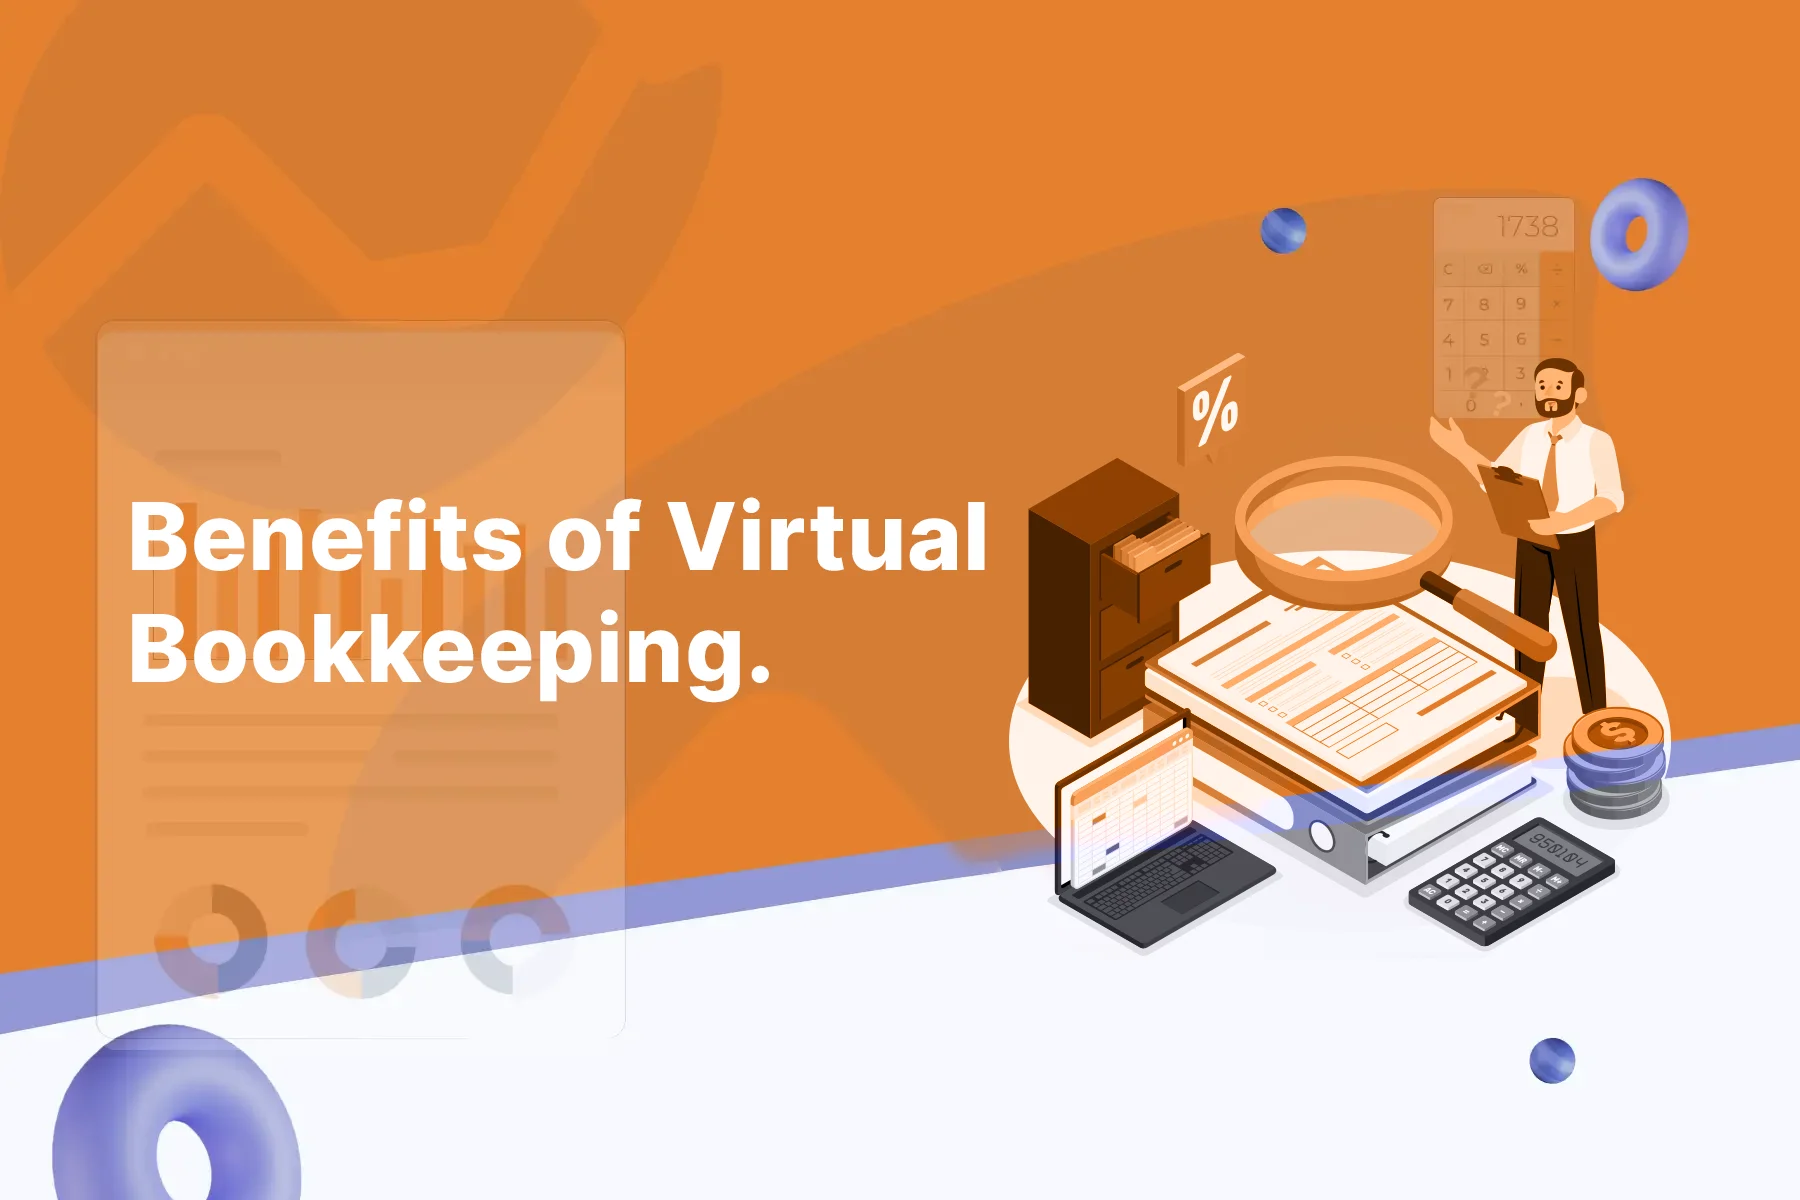 Benefits of Virtual Bookkeeping